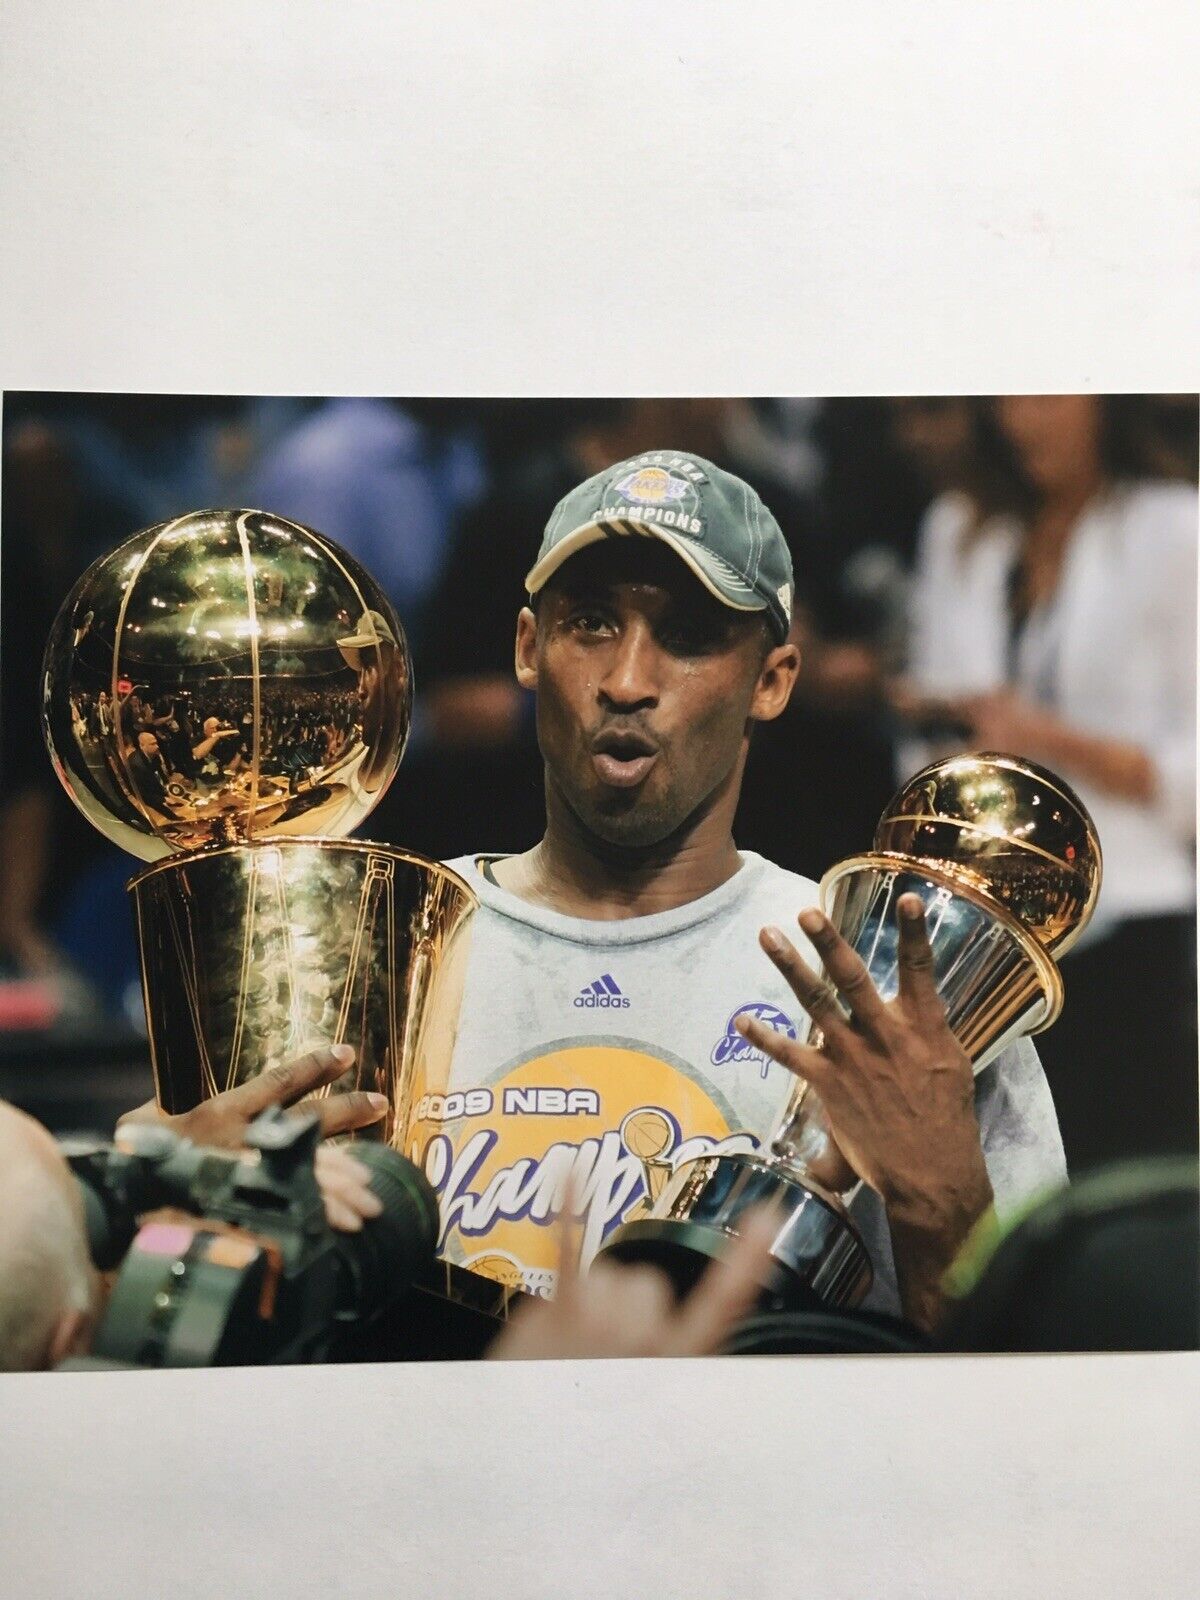 Kobe Bryant Trophy Champion Photo Poster painting Los Angeles Lakers 8x10 Mamba 8/24 2003 Finals